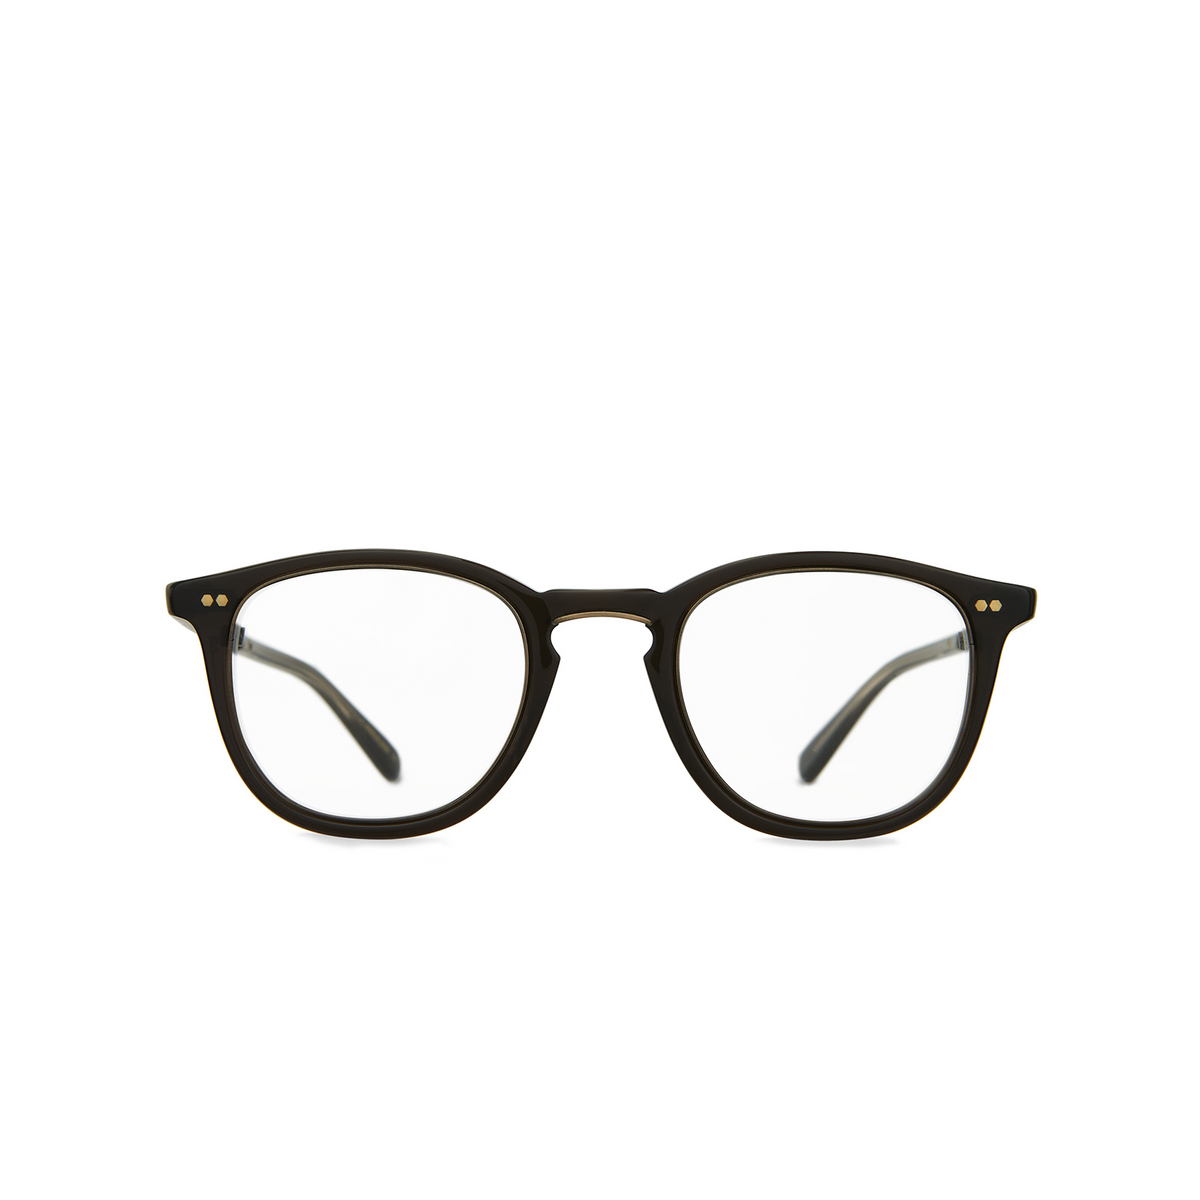 Mr. Leight® Square Eyeglasses: Coopers C color Black Tar - Antique Gold Bktr-atg - front view.